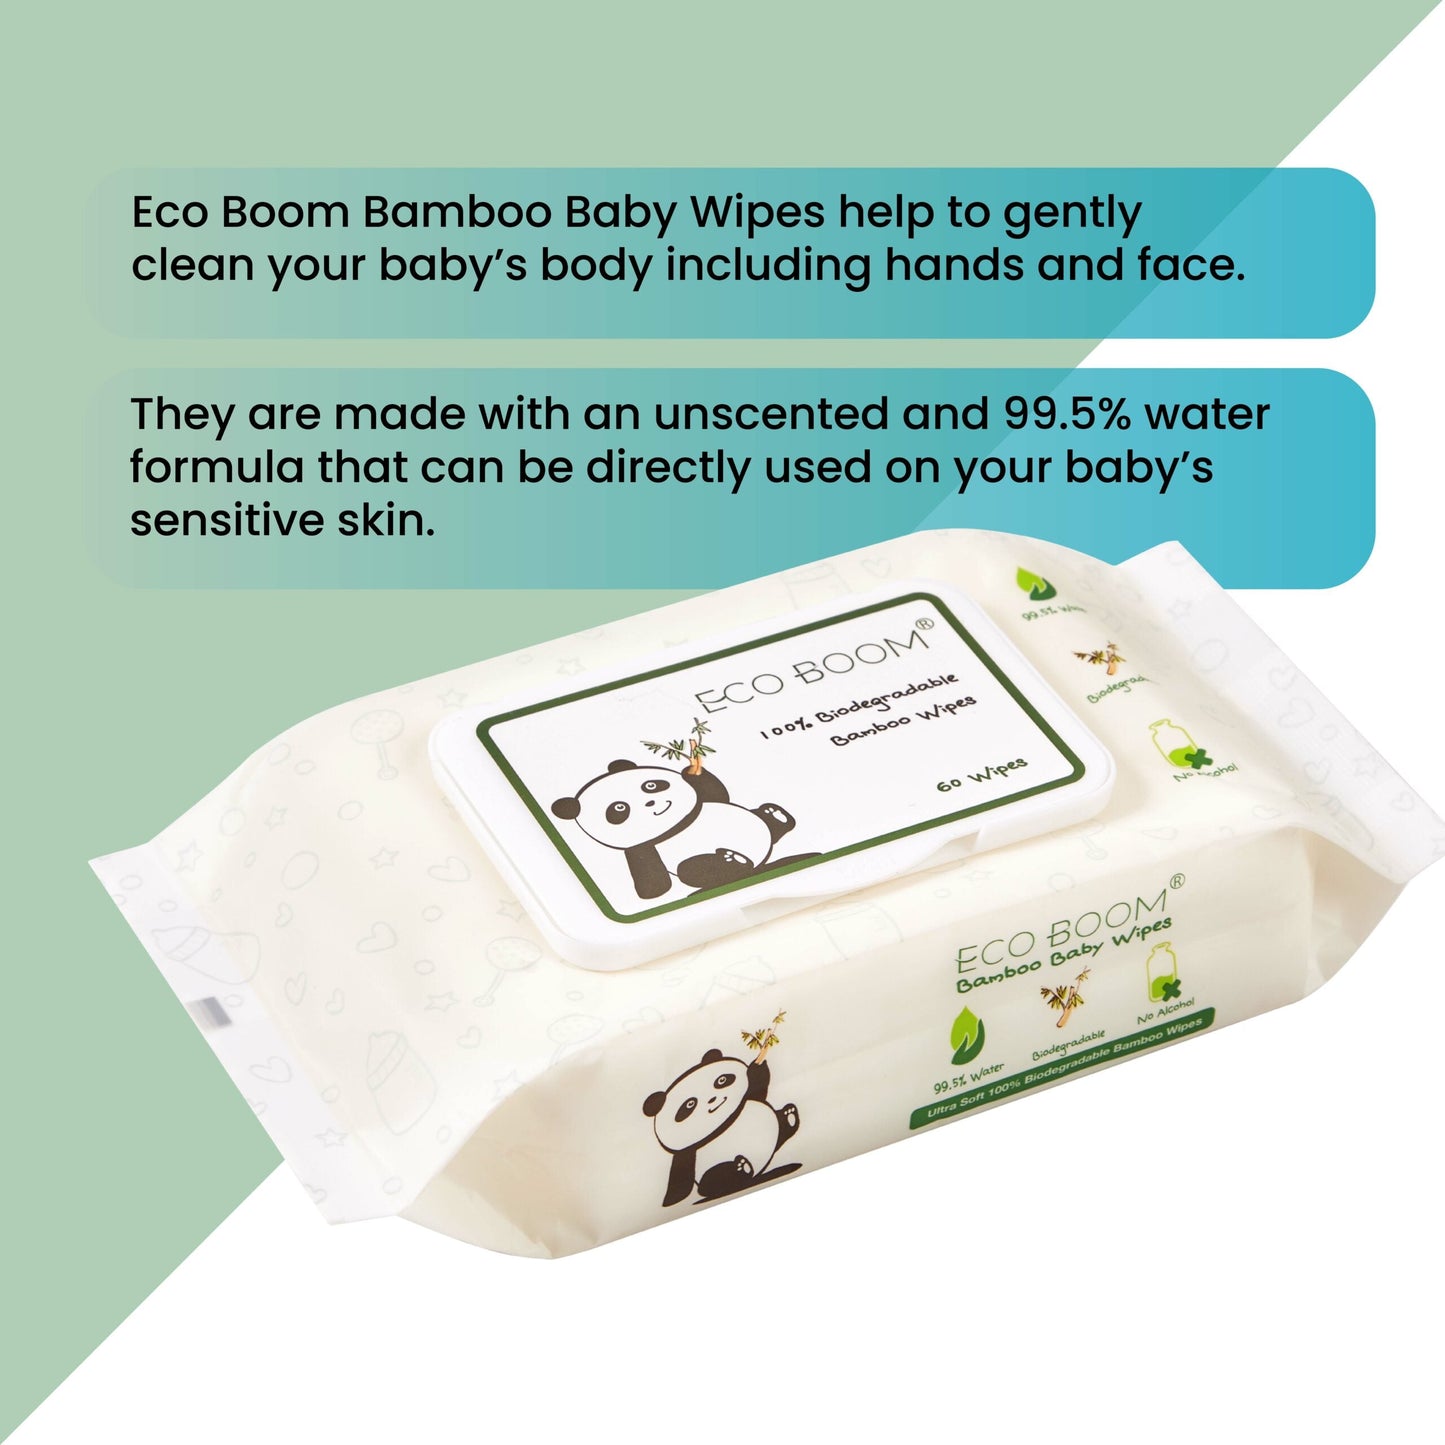 Eco Parenting Bundle- 2 Months Supply of Nappies, Nappy Bags and Baby Wipes (New-Born) - Eco Green Living